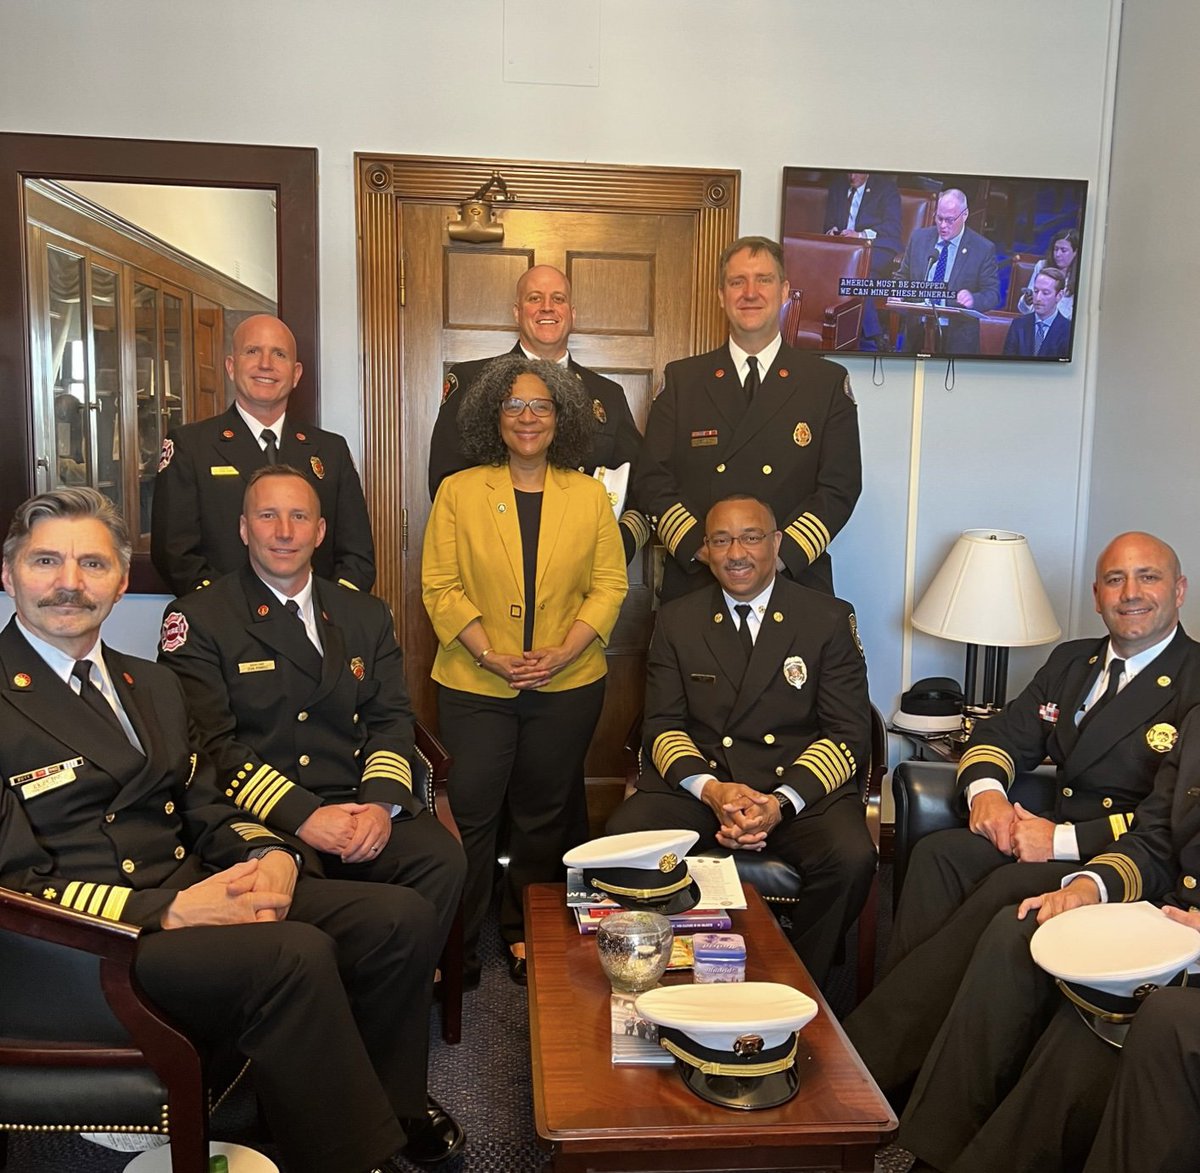 Our firefighters are pillars of the community - responding to emergencies, engaging with residents, and serving as local leaders. I enjoyed meeting w/ Fire Chiefs to discuss more ways the federal gov't can support them.